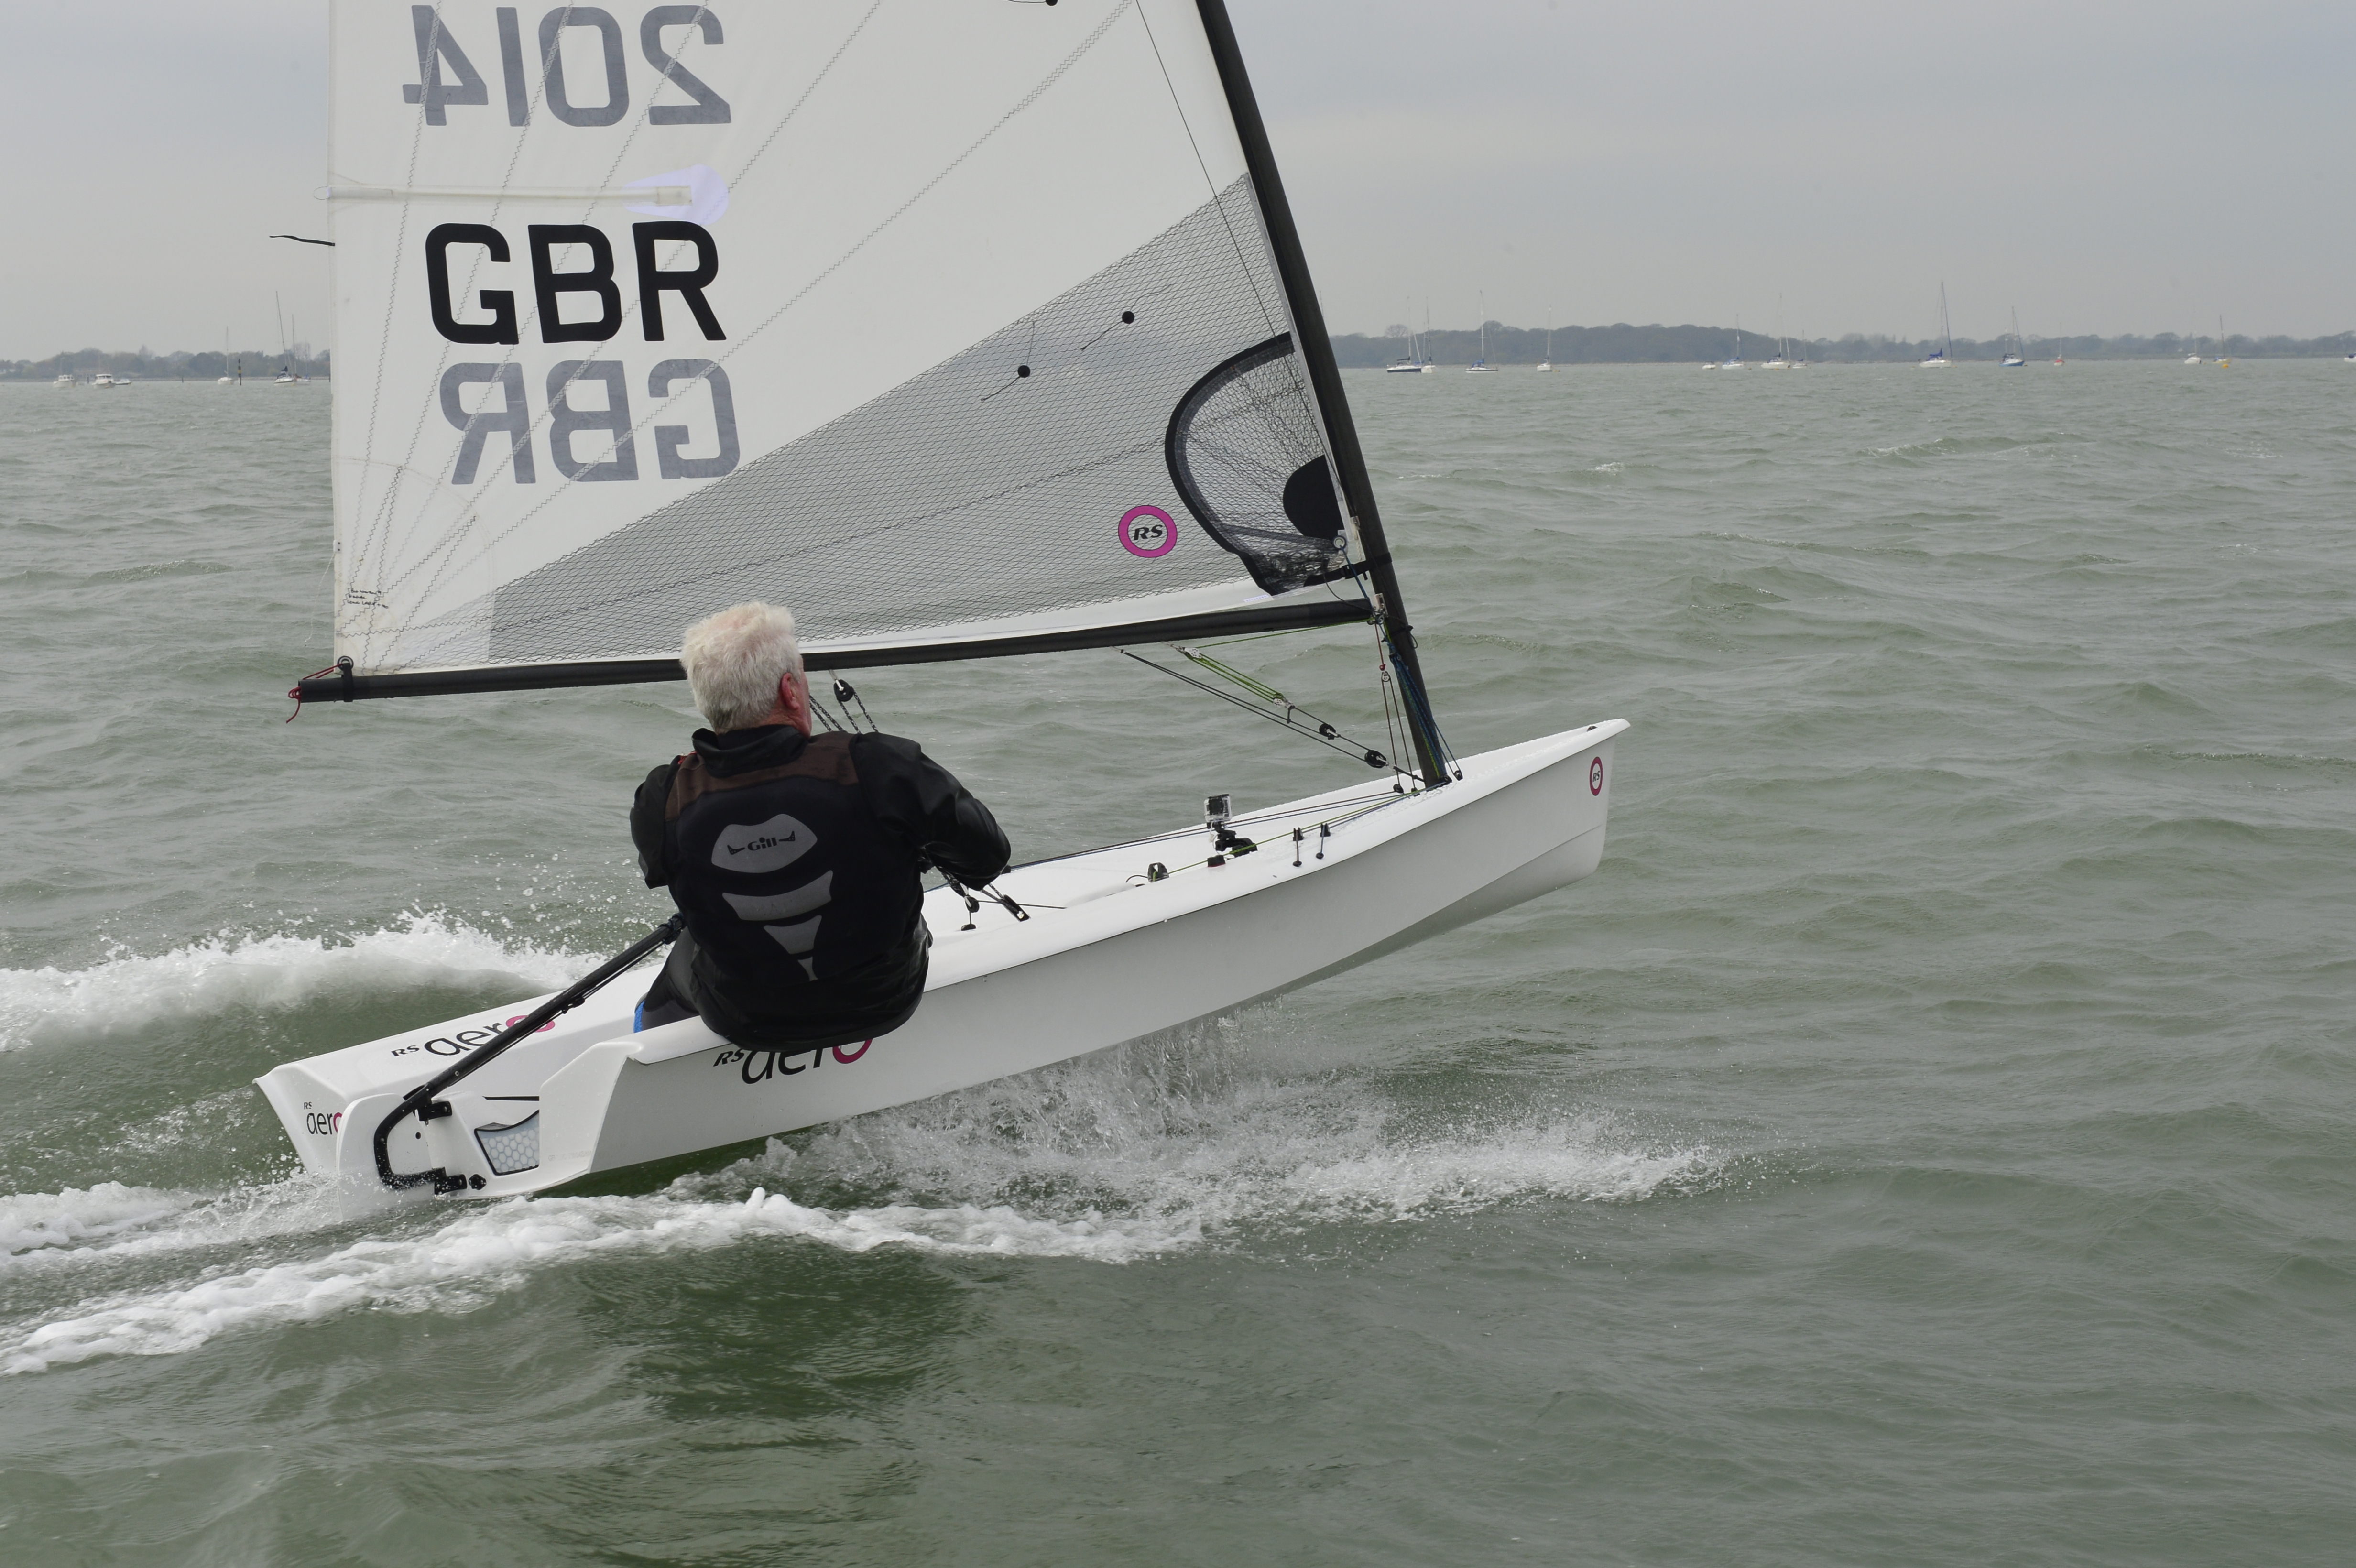 Dinghy sailing: why it’s great for beginners and keelboat sailors